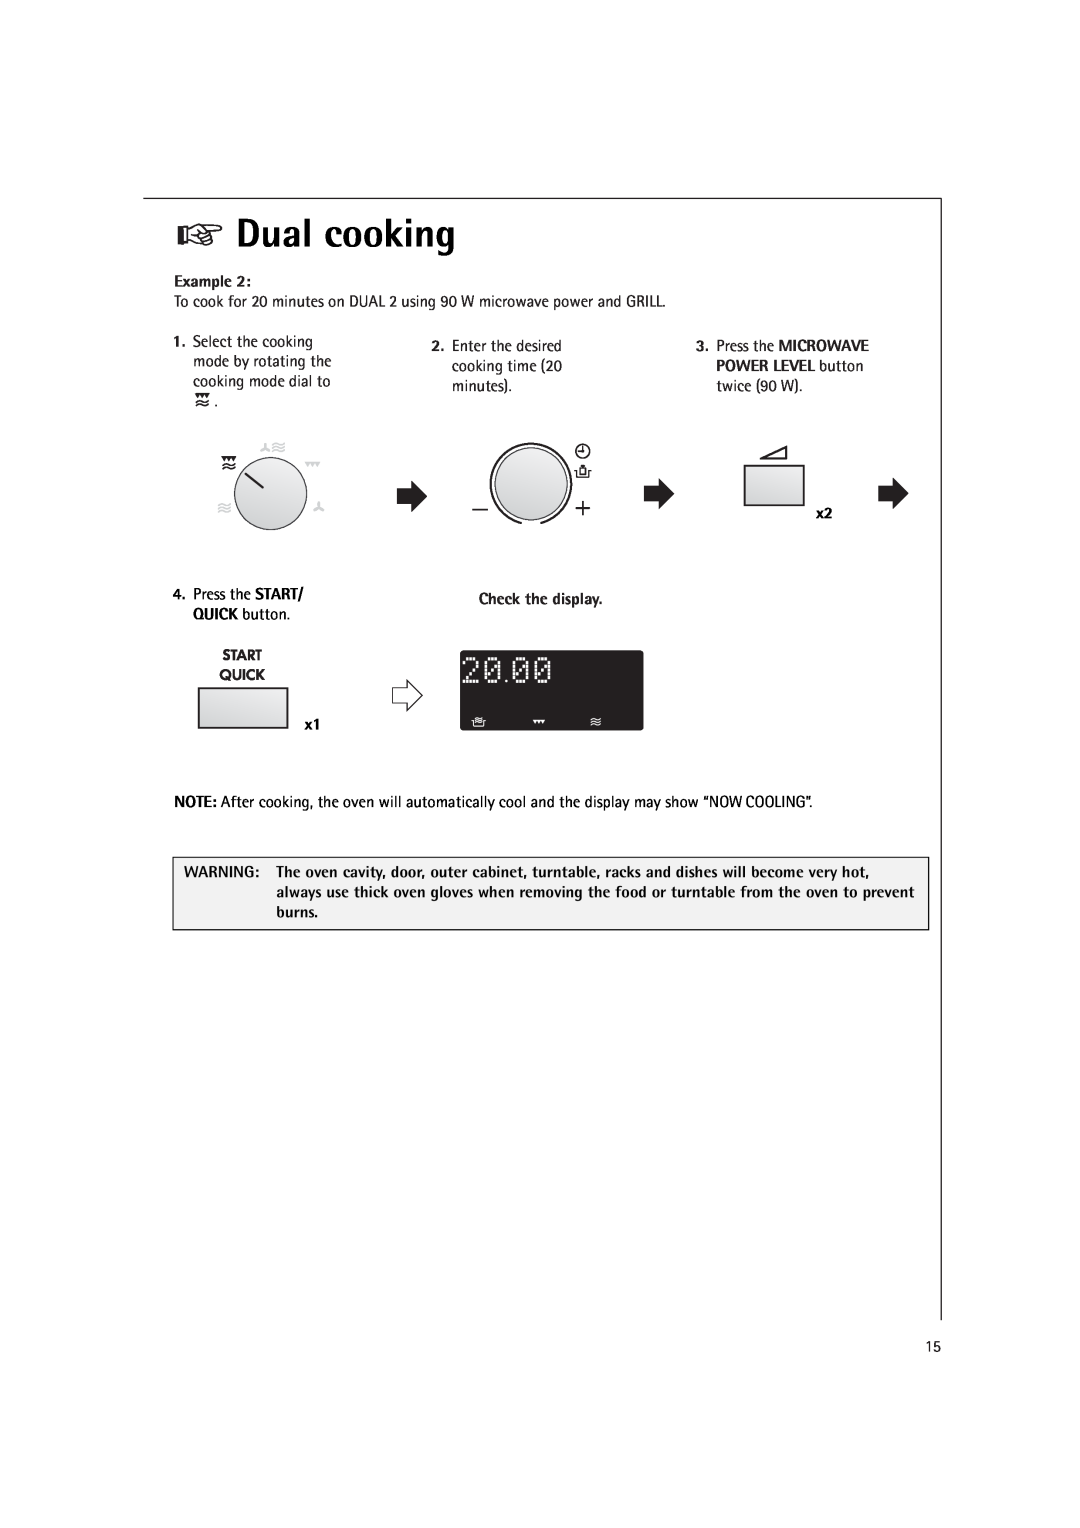 Electrolux MCC4060E Dual cooking, Example, To cook for 20 minutes on DUAL 2 using 90 W microwave power and GRILL 